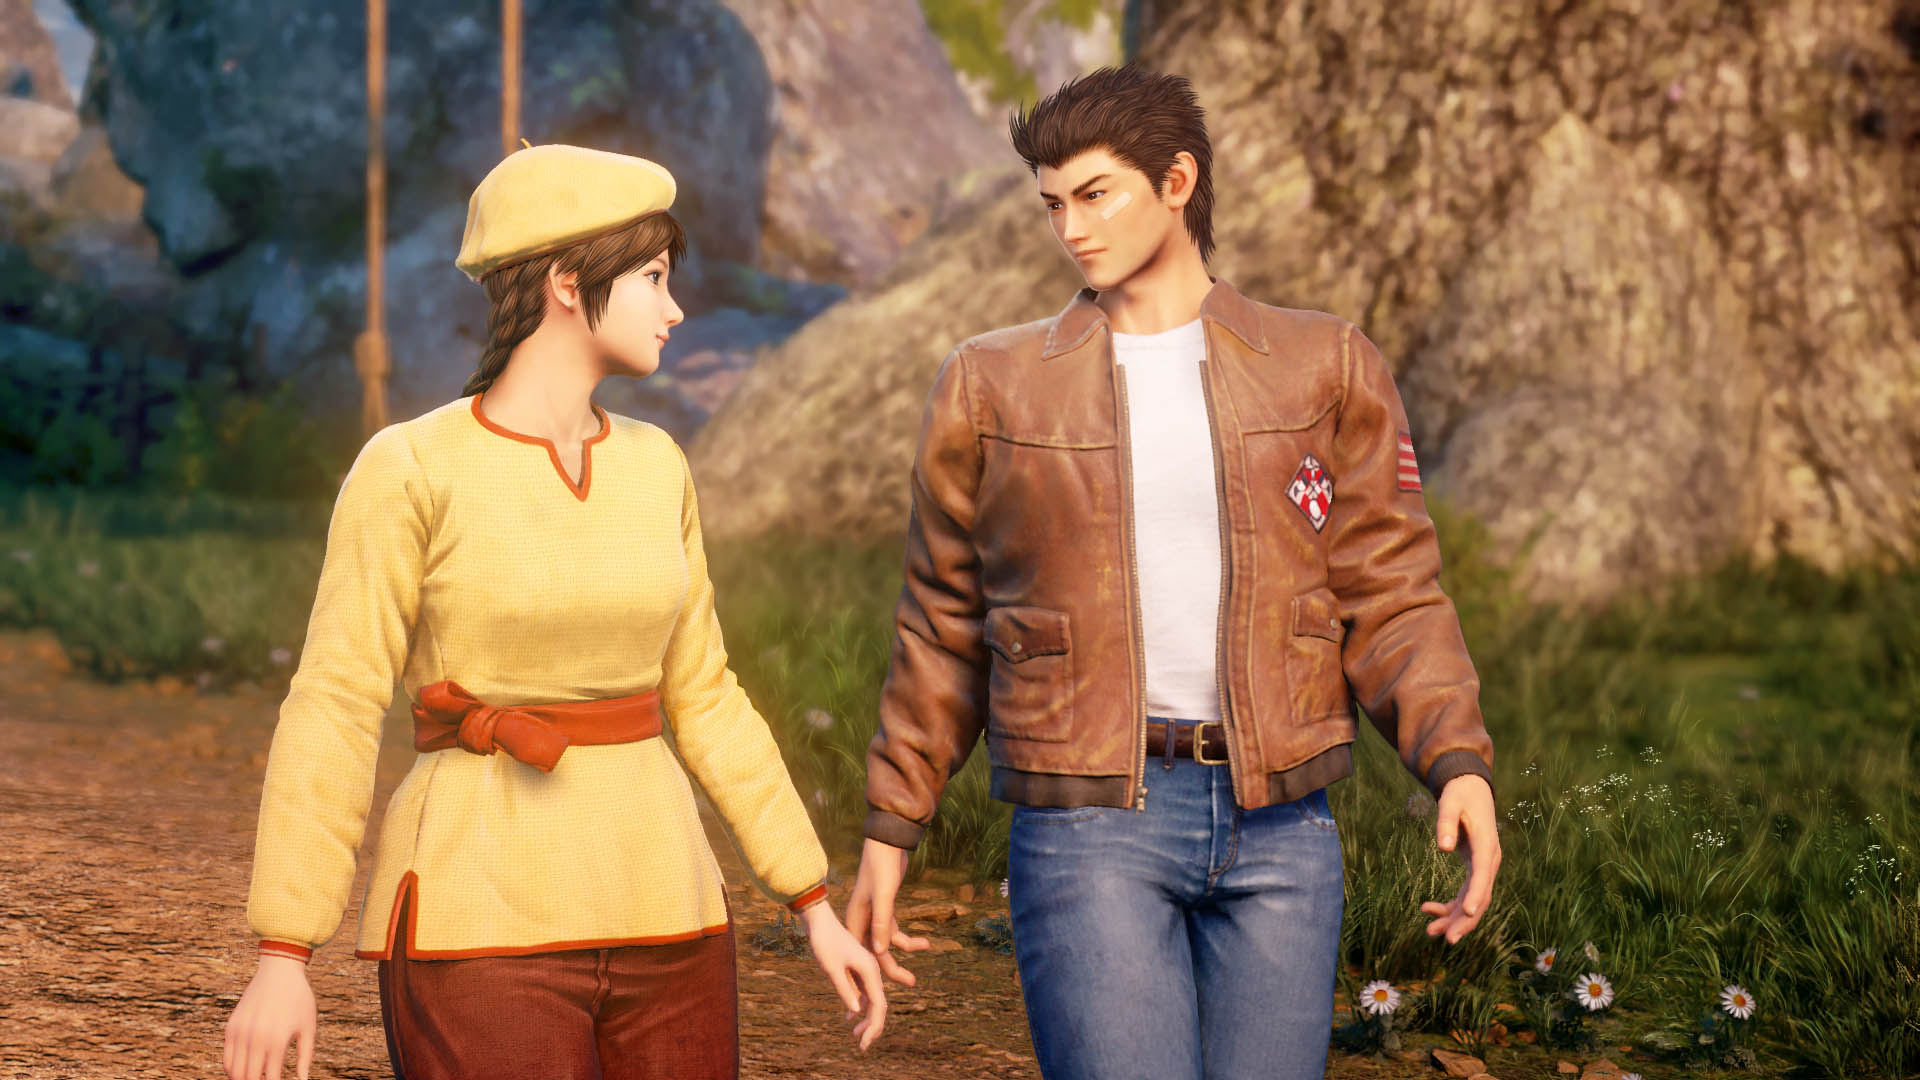 Epic’s next free game is Shenmue 3